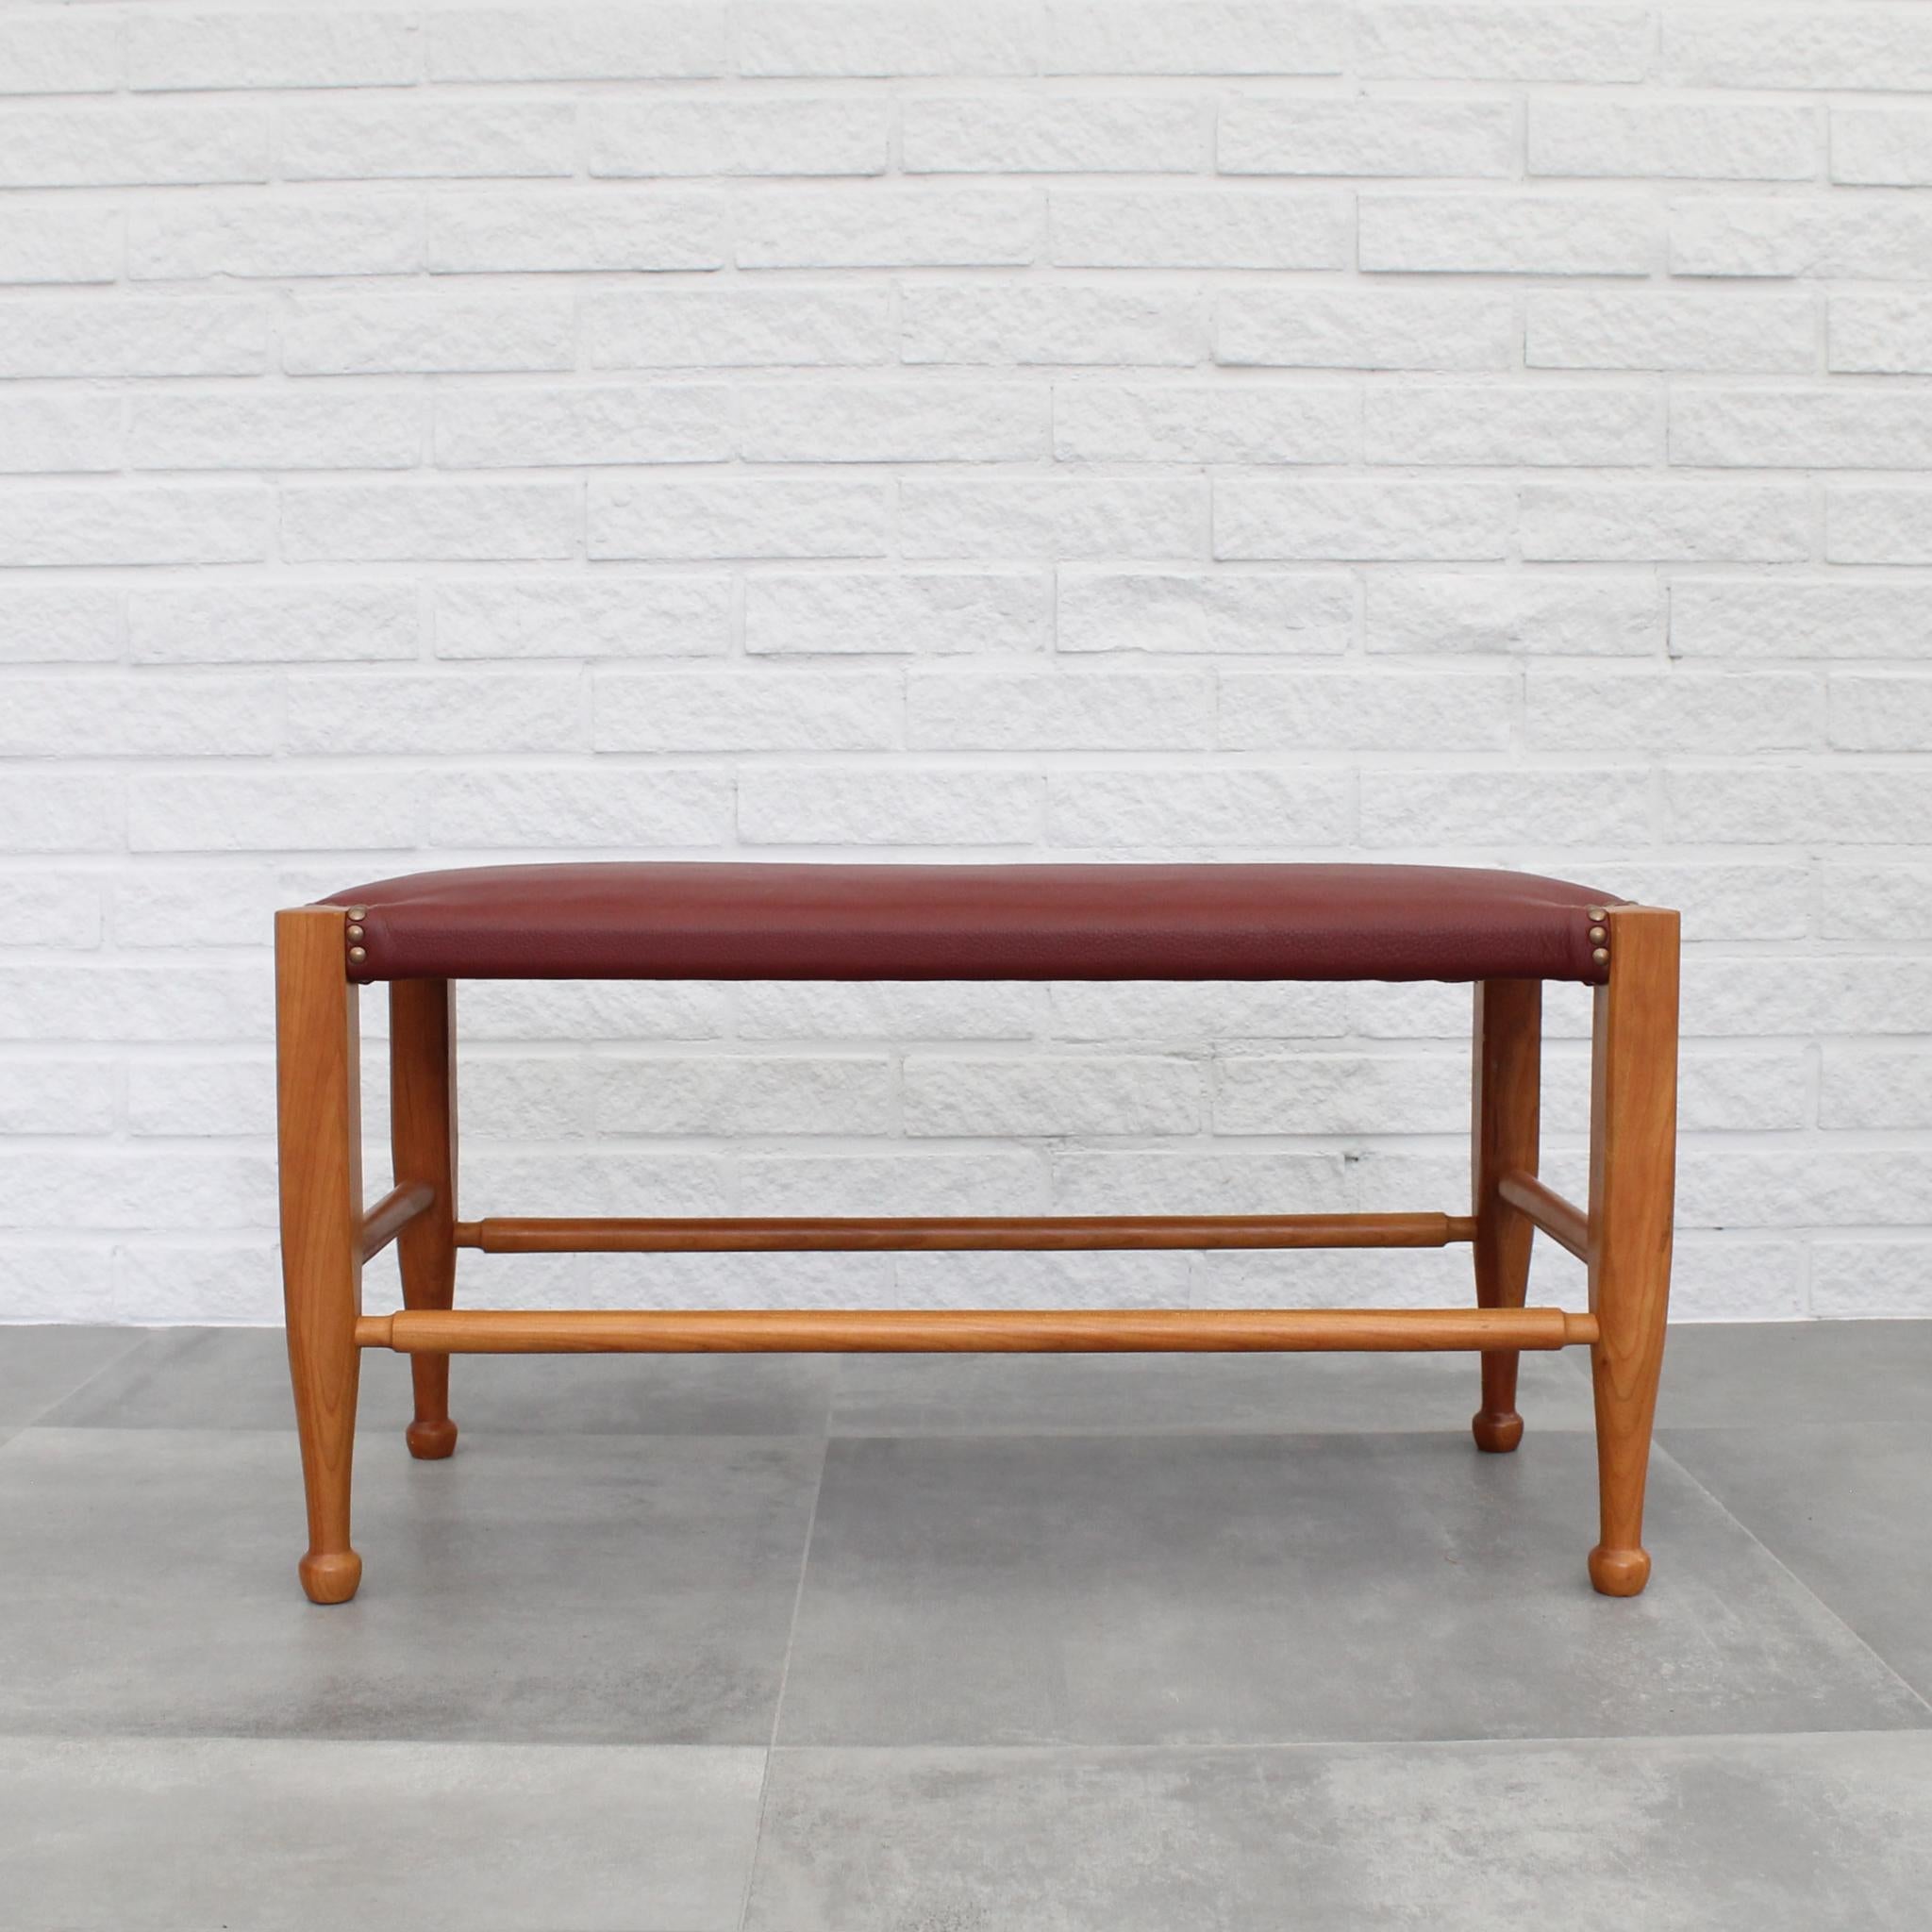 Stool model 2009, designed by Josef Frank for Firma Svenskt Tenn. Crafted from solid walnut with vibrant red leather upholstery, it features ornamental brass rivets adorning its legs. Reupholstered in Tärnsjö leather. The Austrian architect Josef